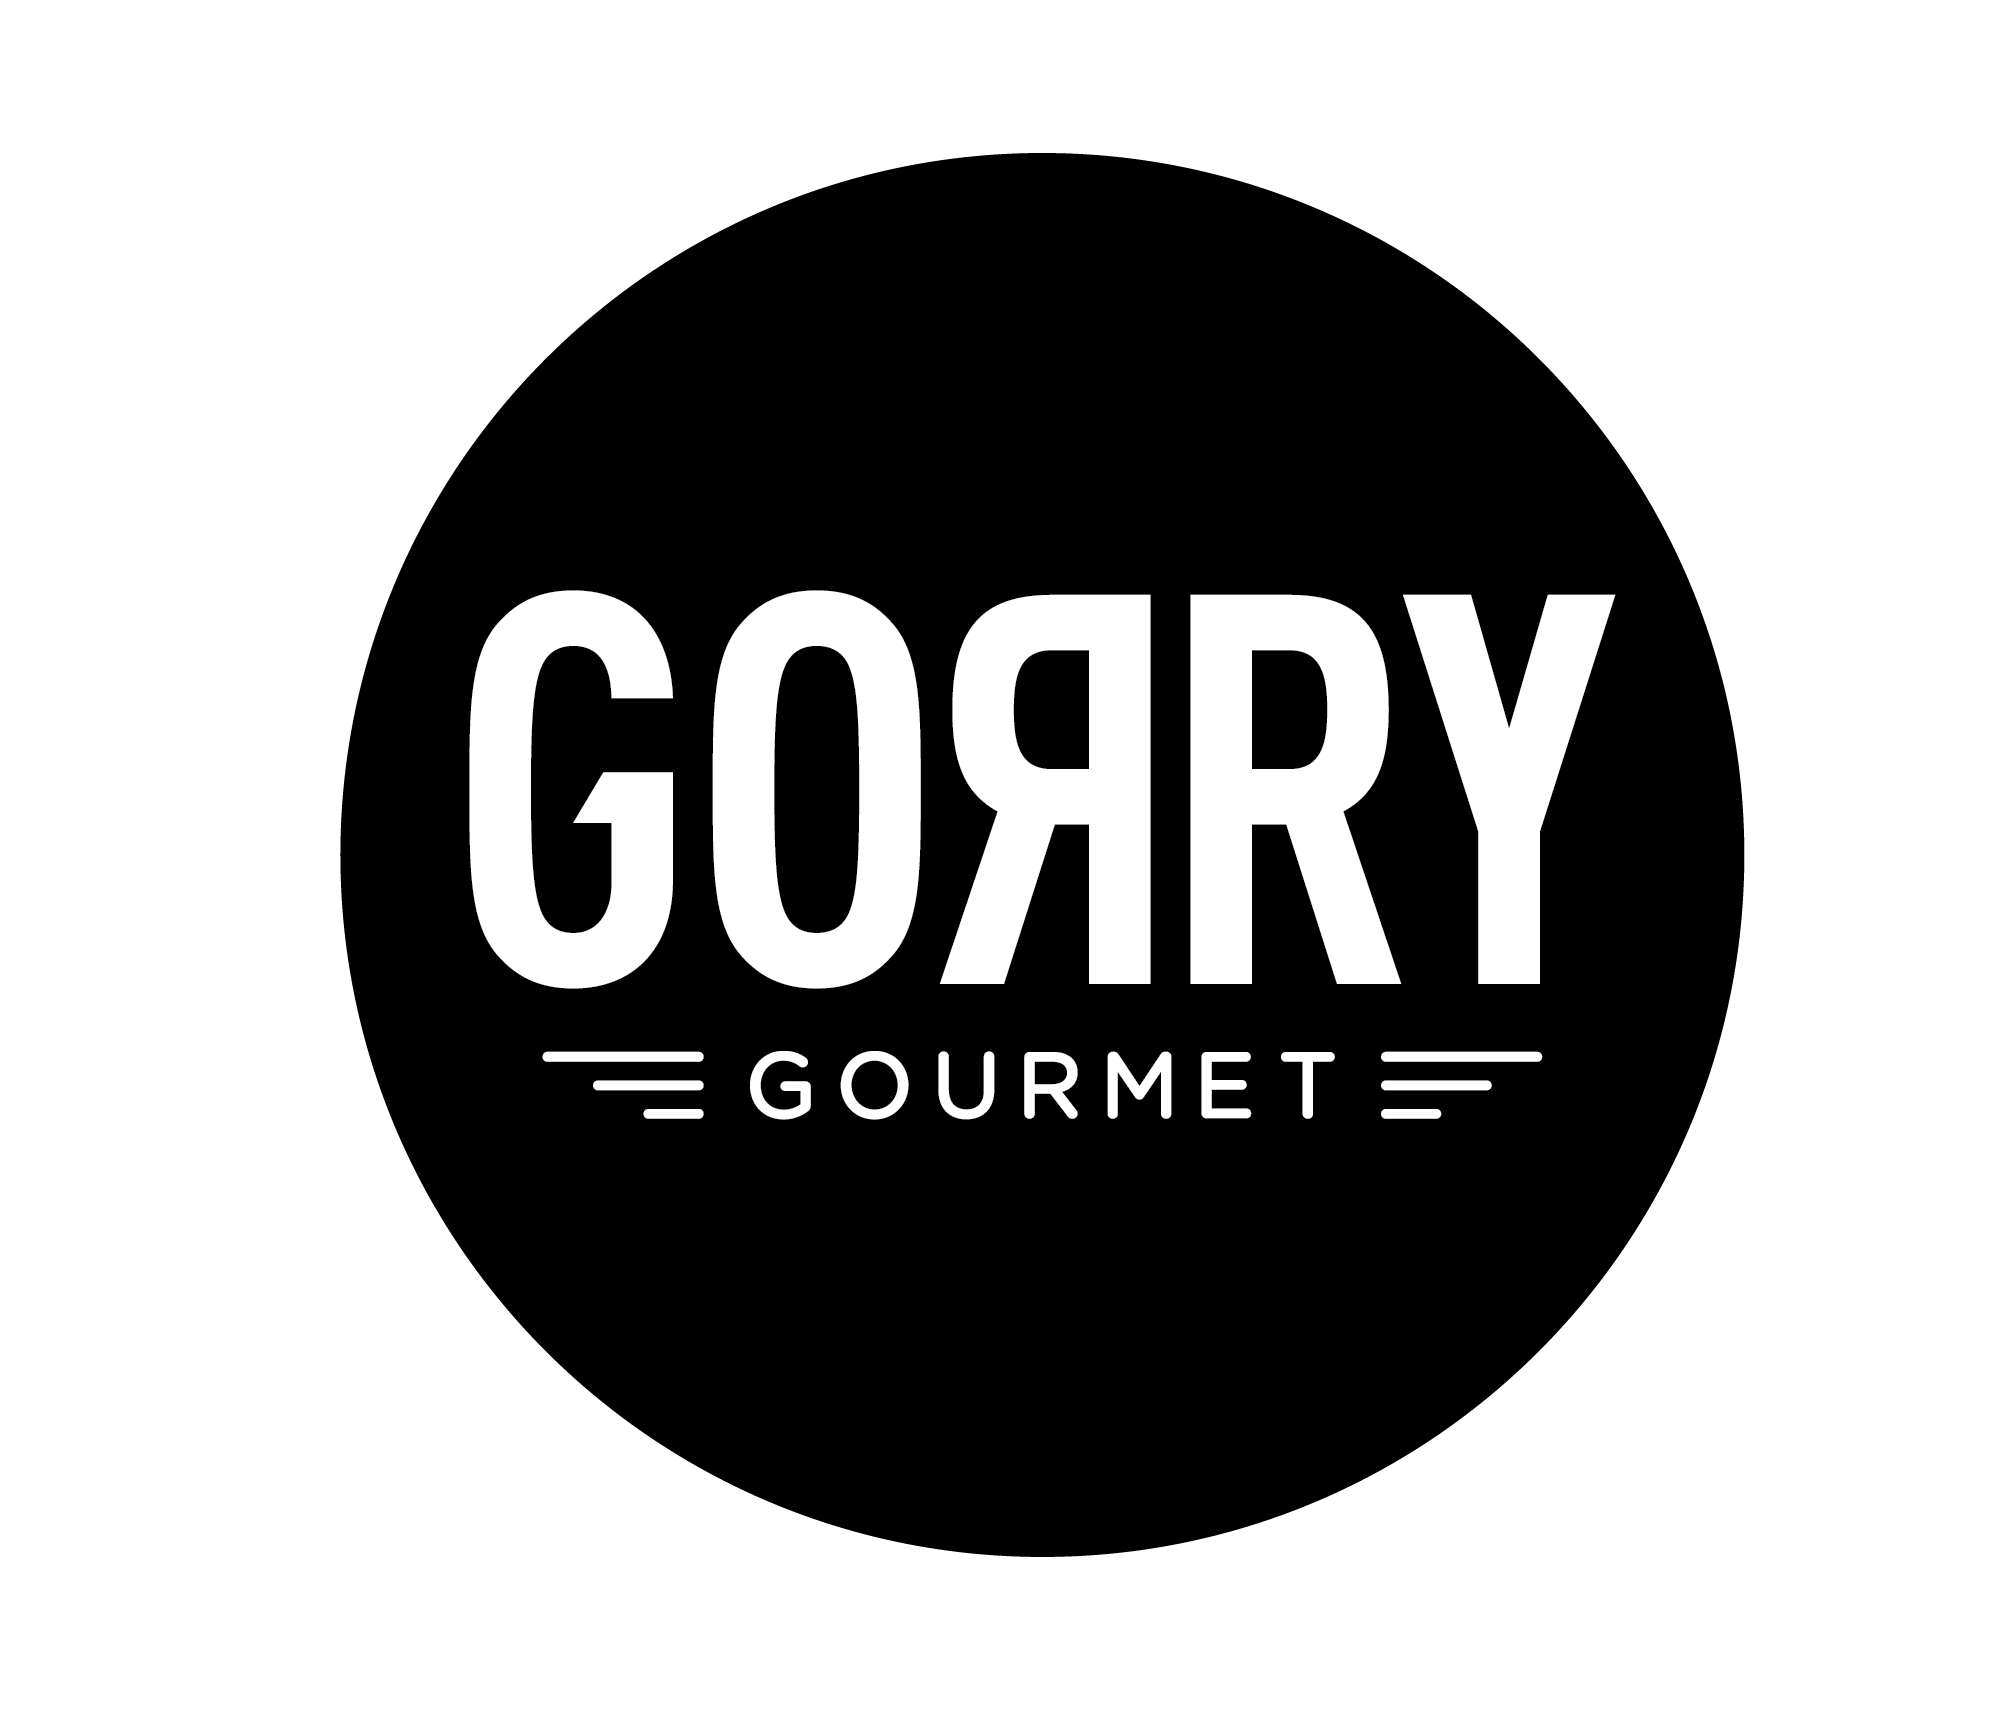 Gorry Gourmet. Official Store